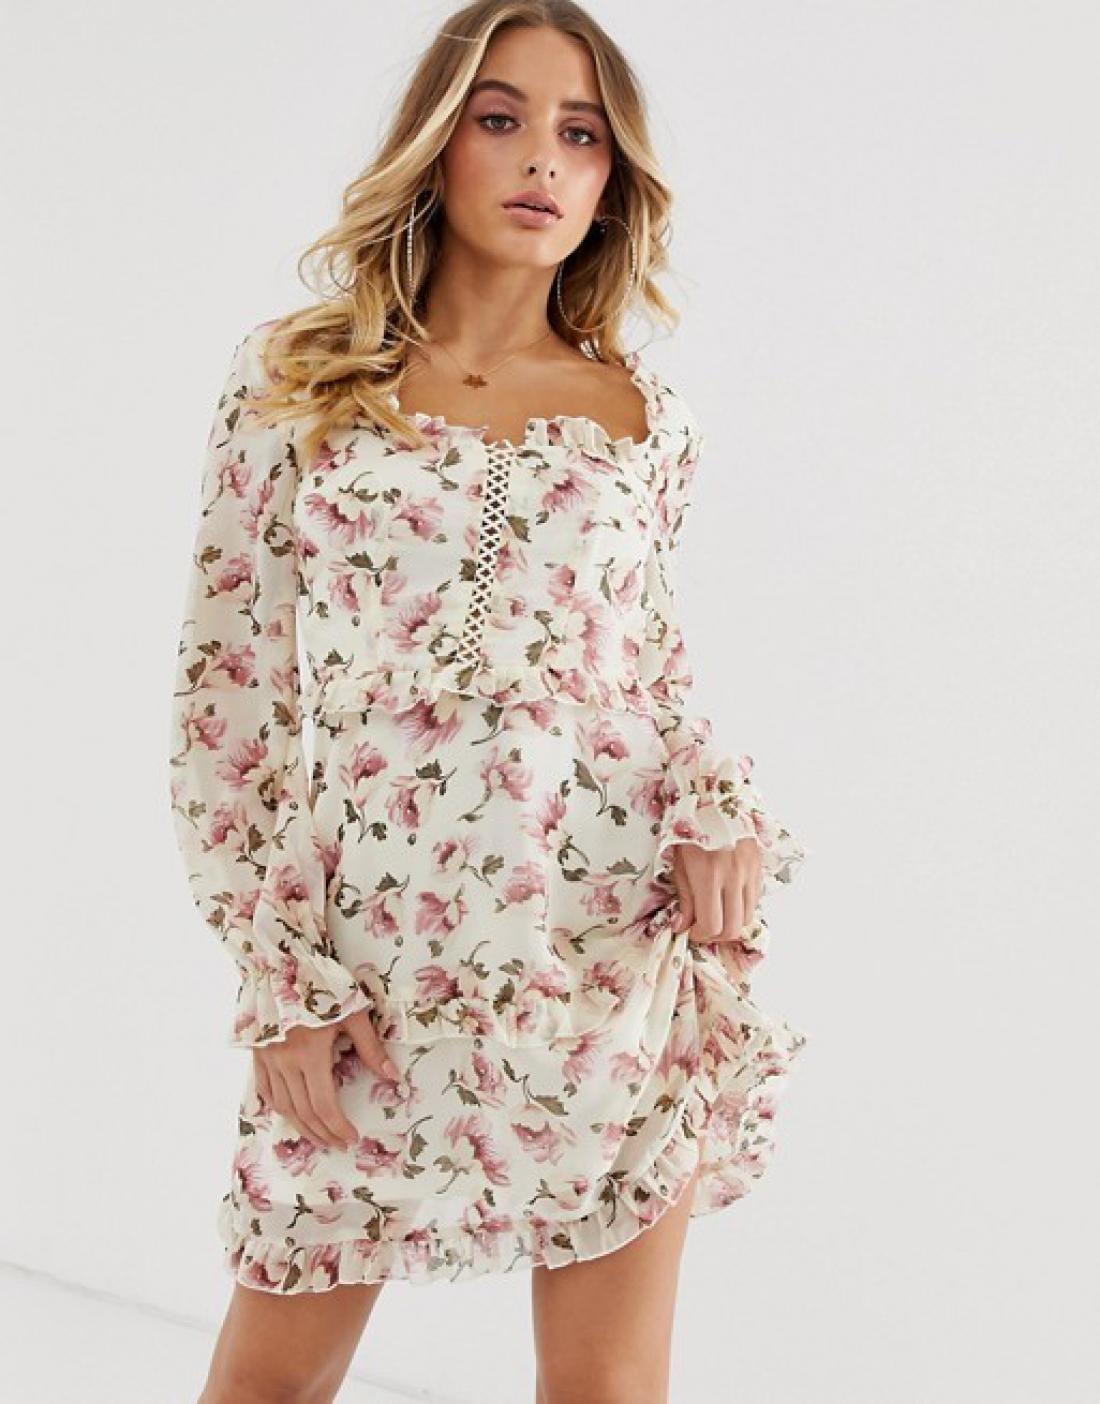 Missguided, 28,99 evra